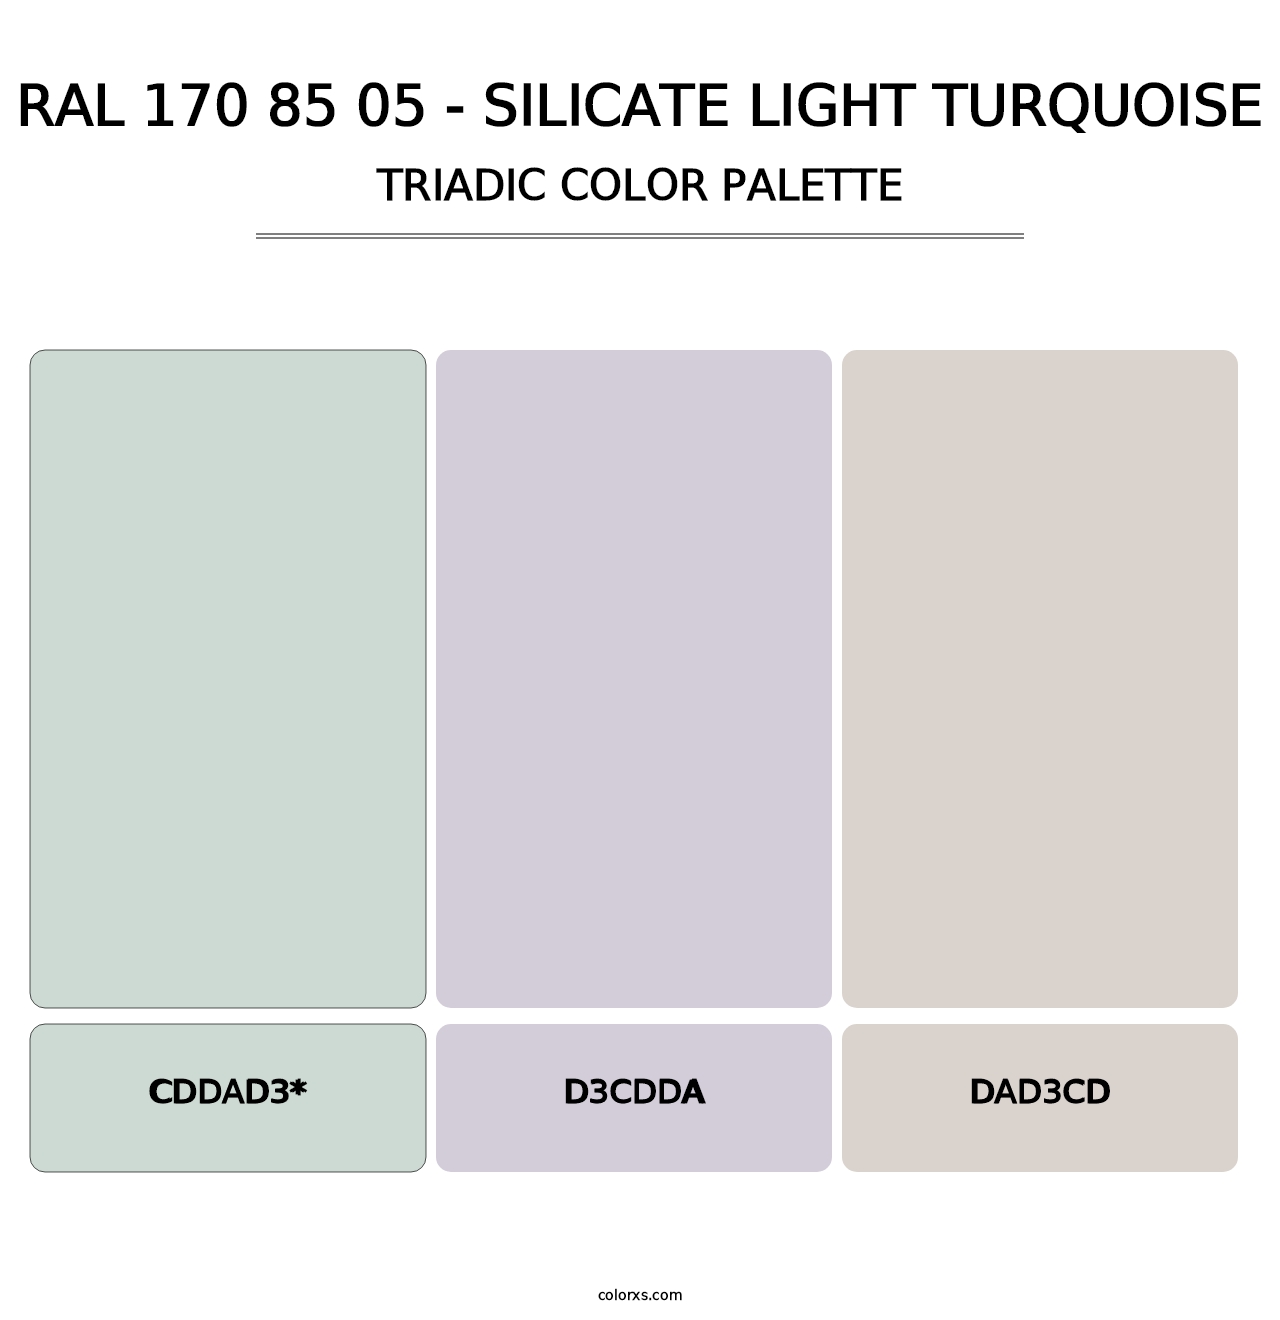 RAL 170 85 05 - Silicate Light Turquoise - Triadic Color Palette